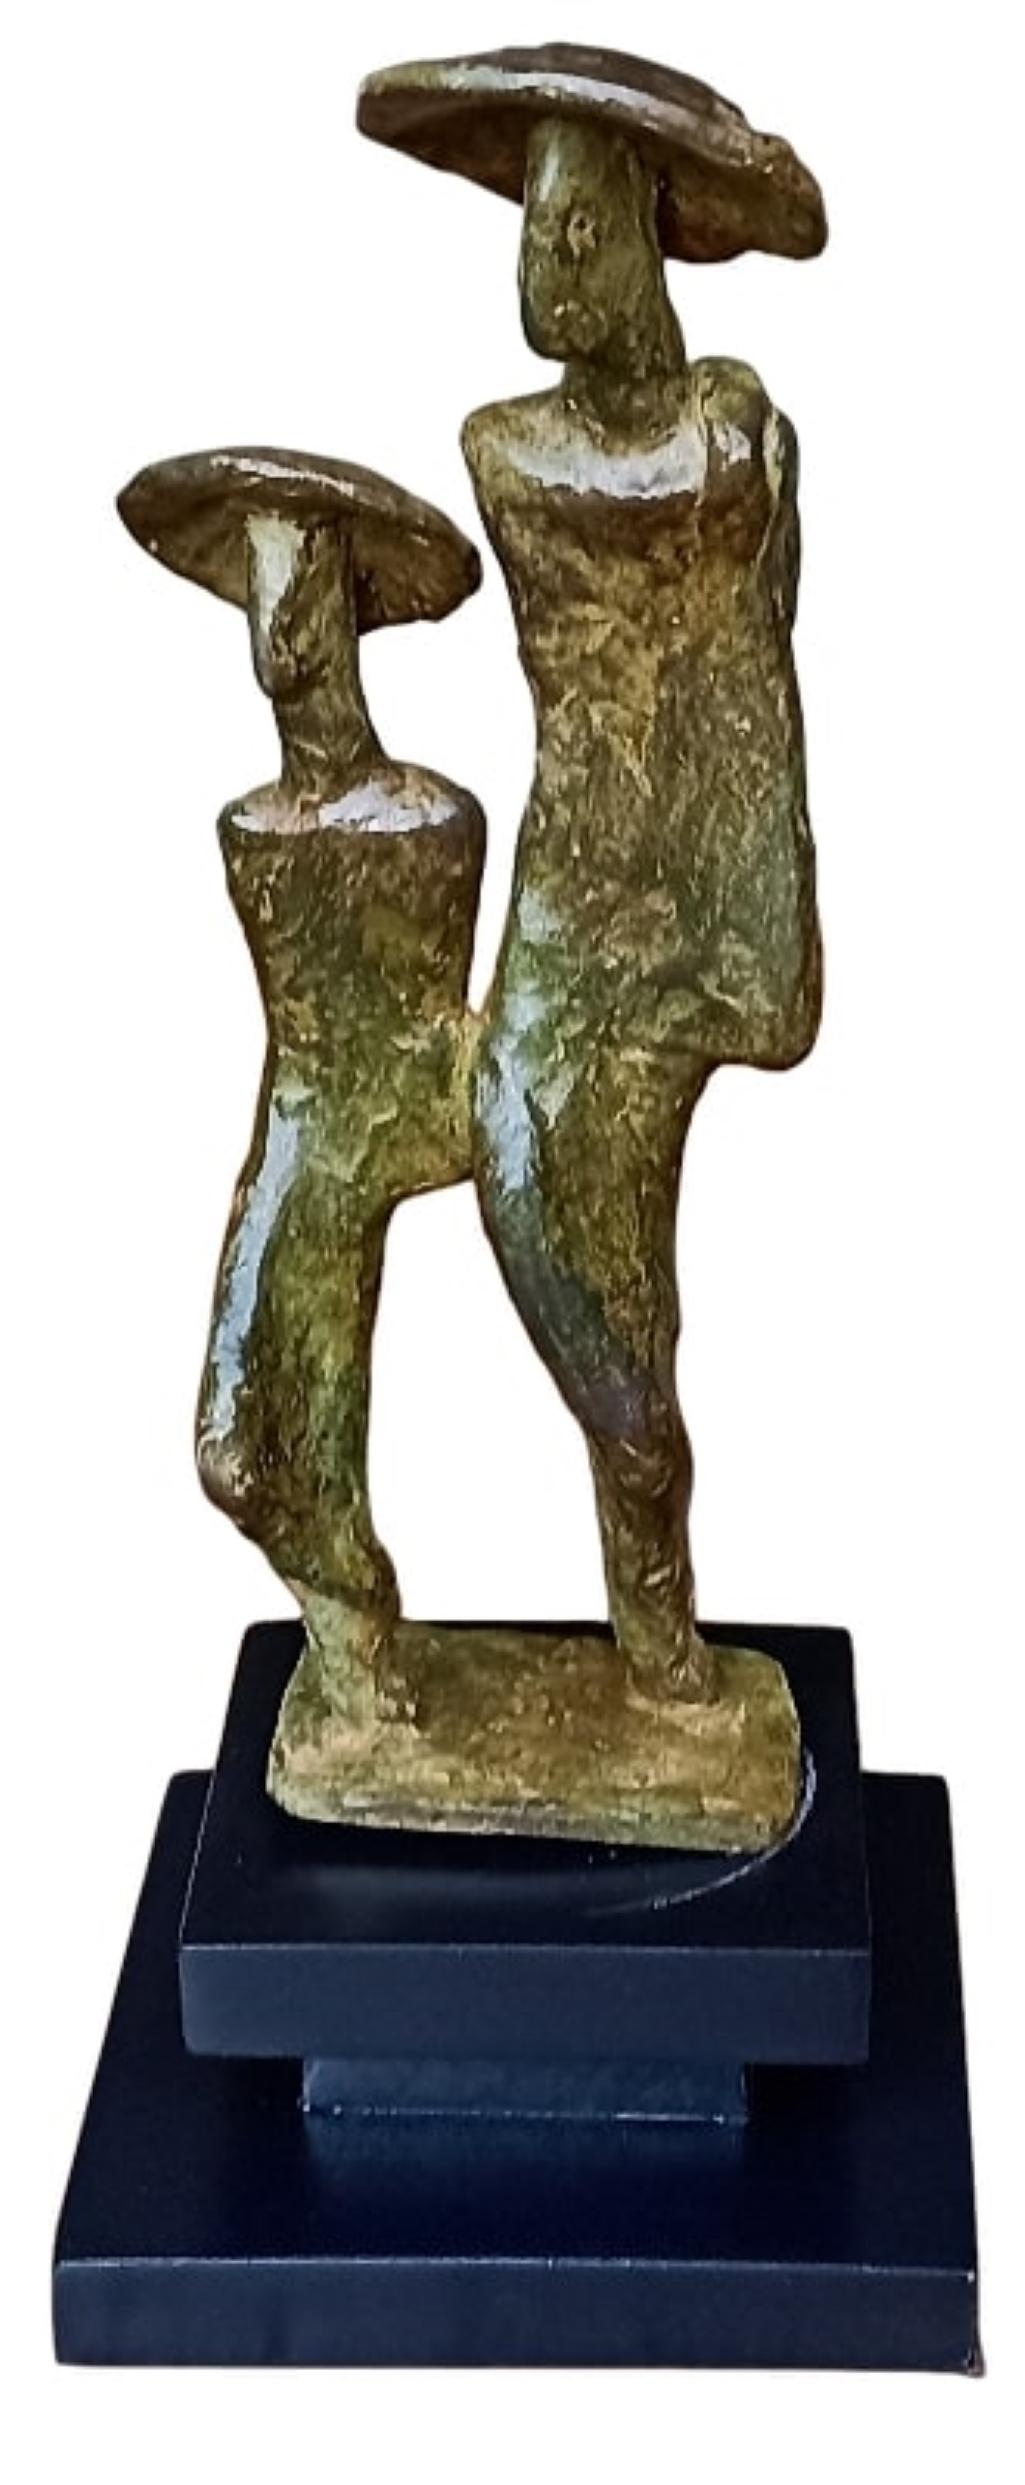 Tushar Kanti Das Roy Abstract Sculpture - Untitled, Bronze Sculpture, Figurative Brownish by Contemporary Artist“In Stock”